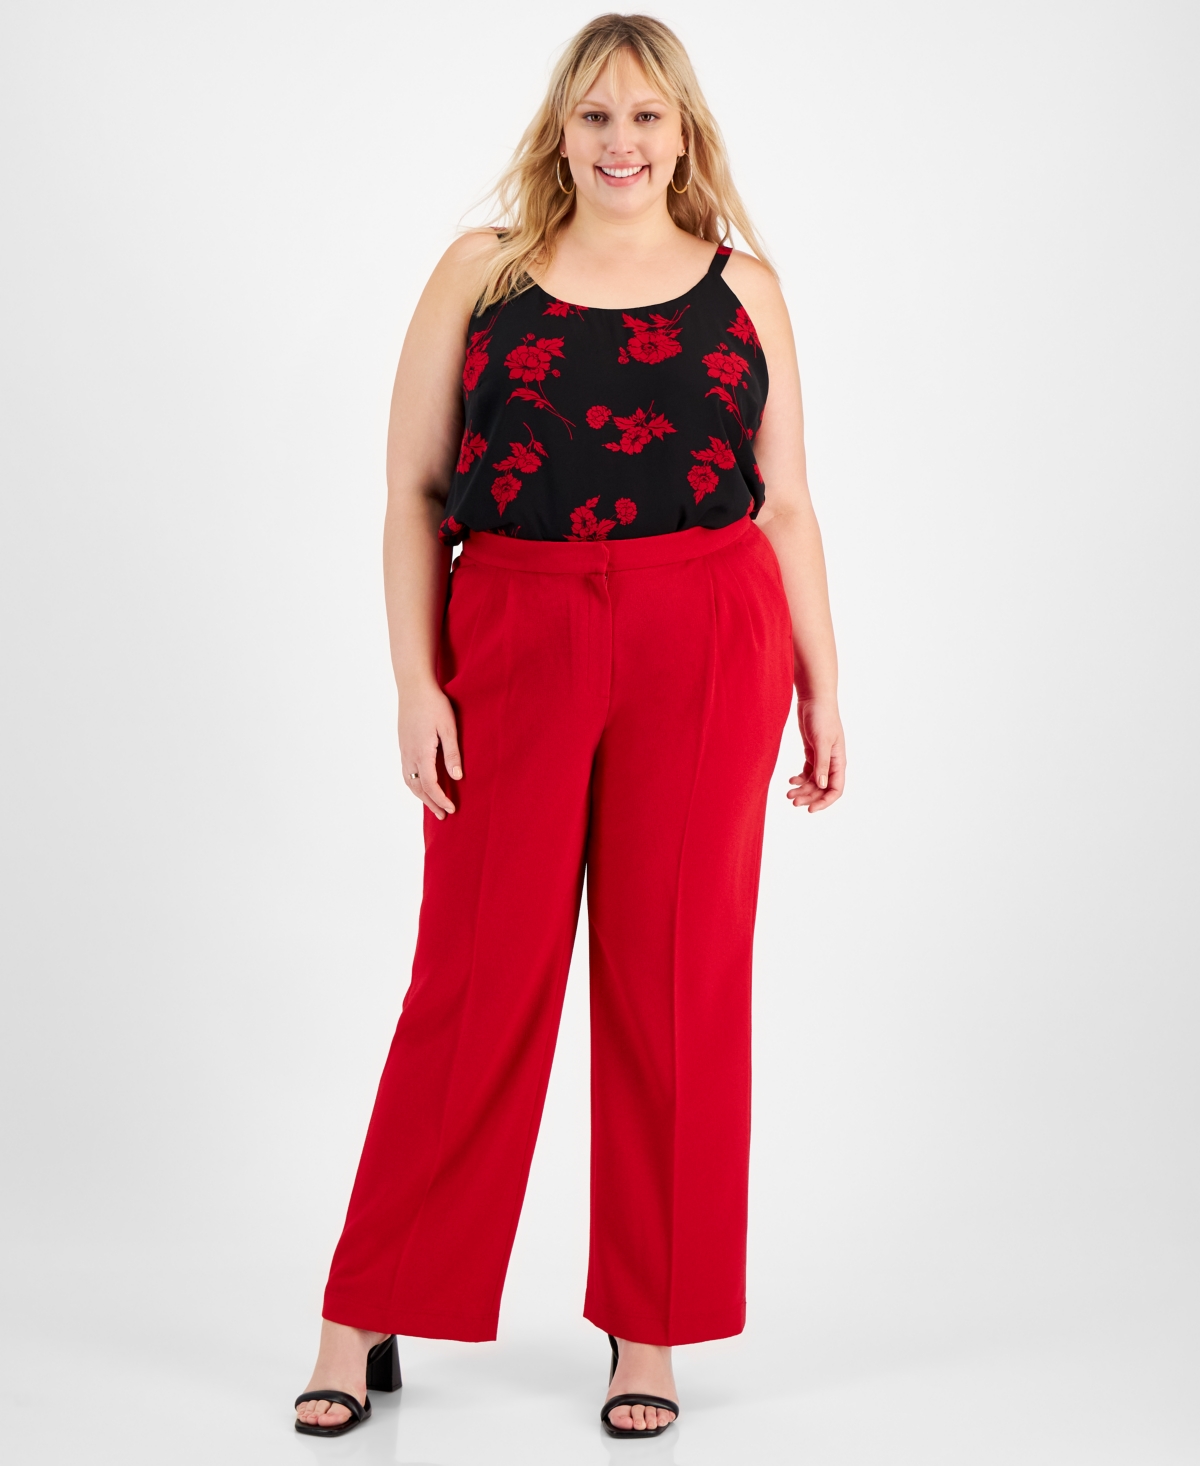  Bar Iii Plus Size Textured Crepe Wide-Leg Pants, Created for Macy's